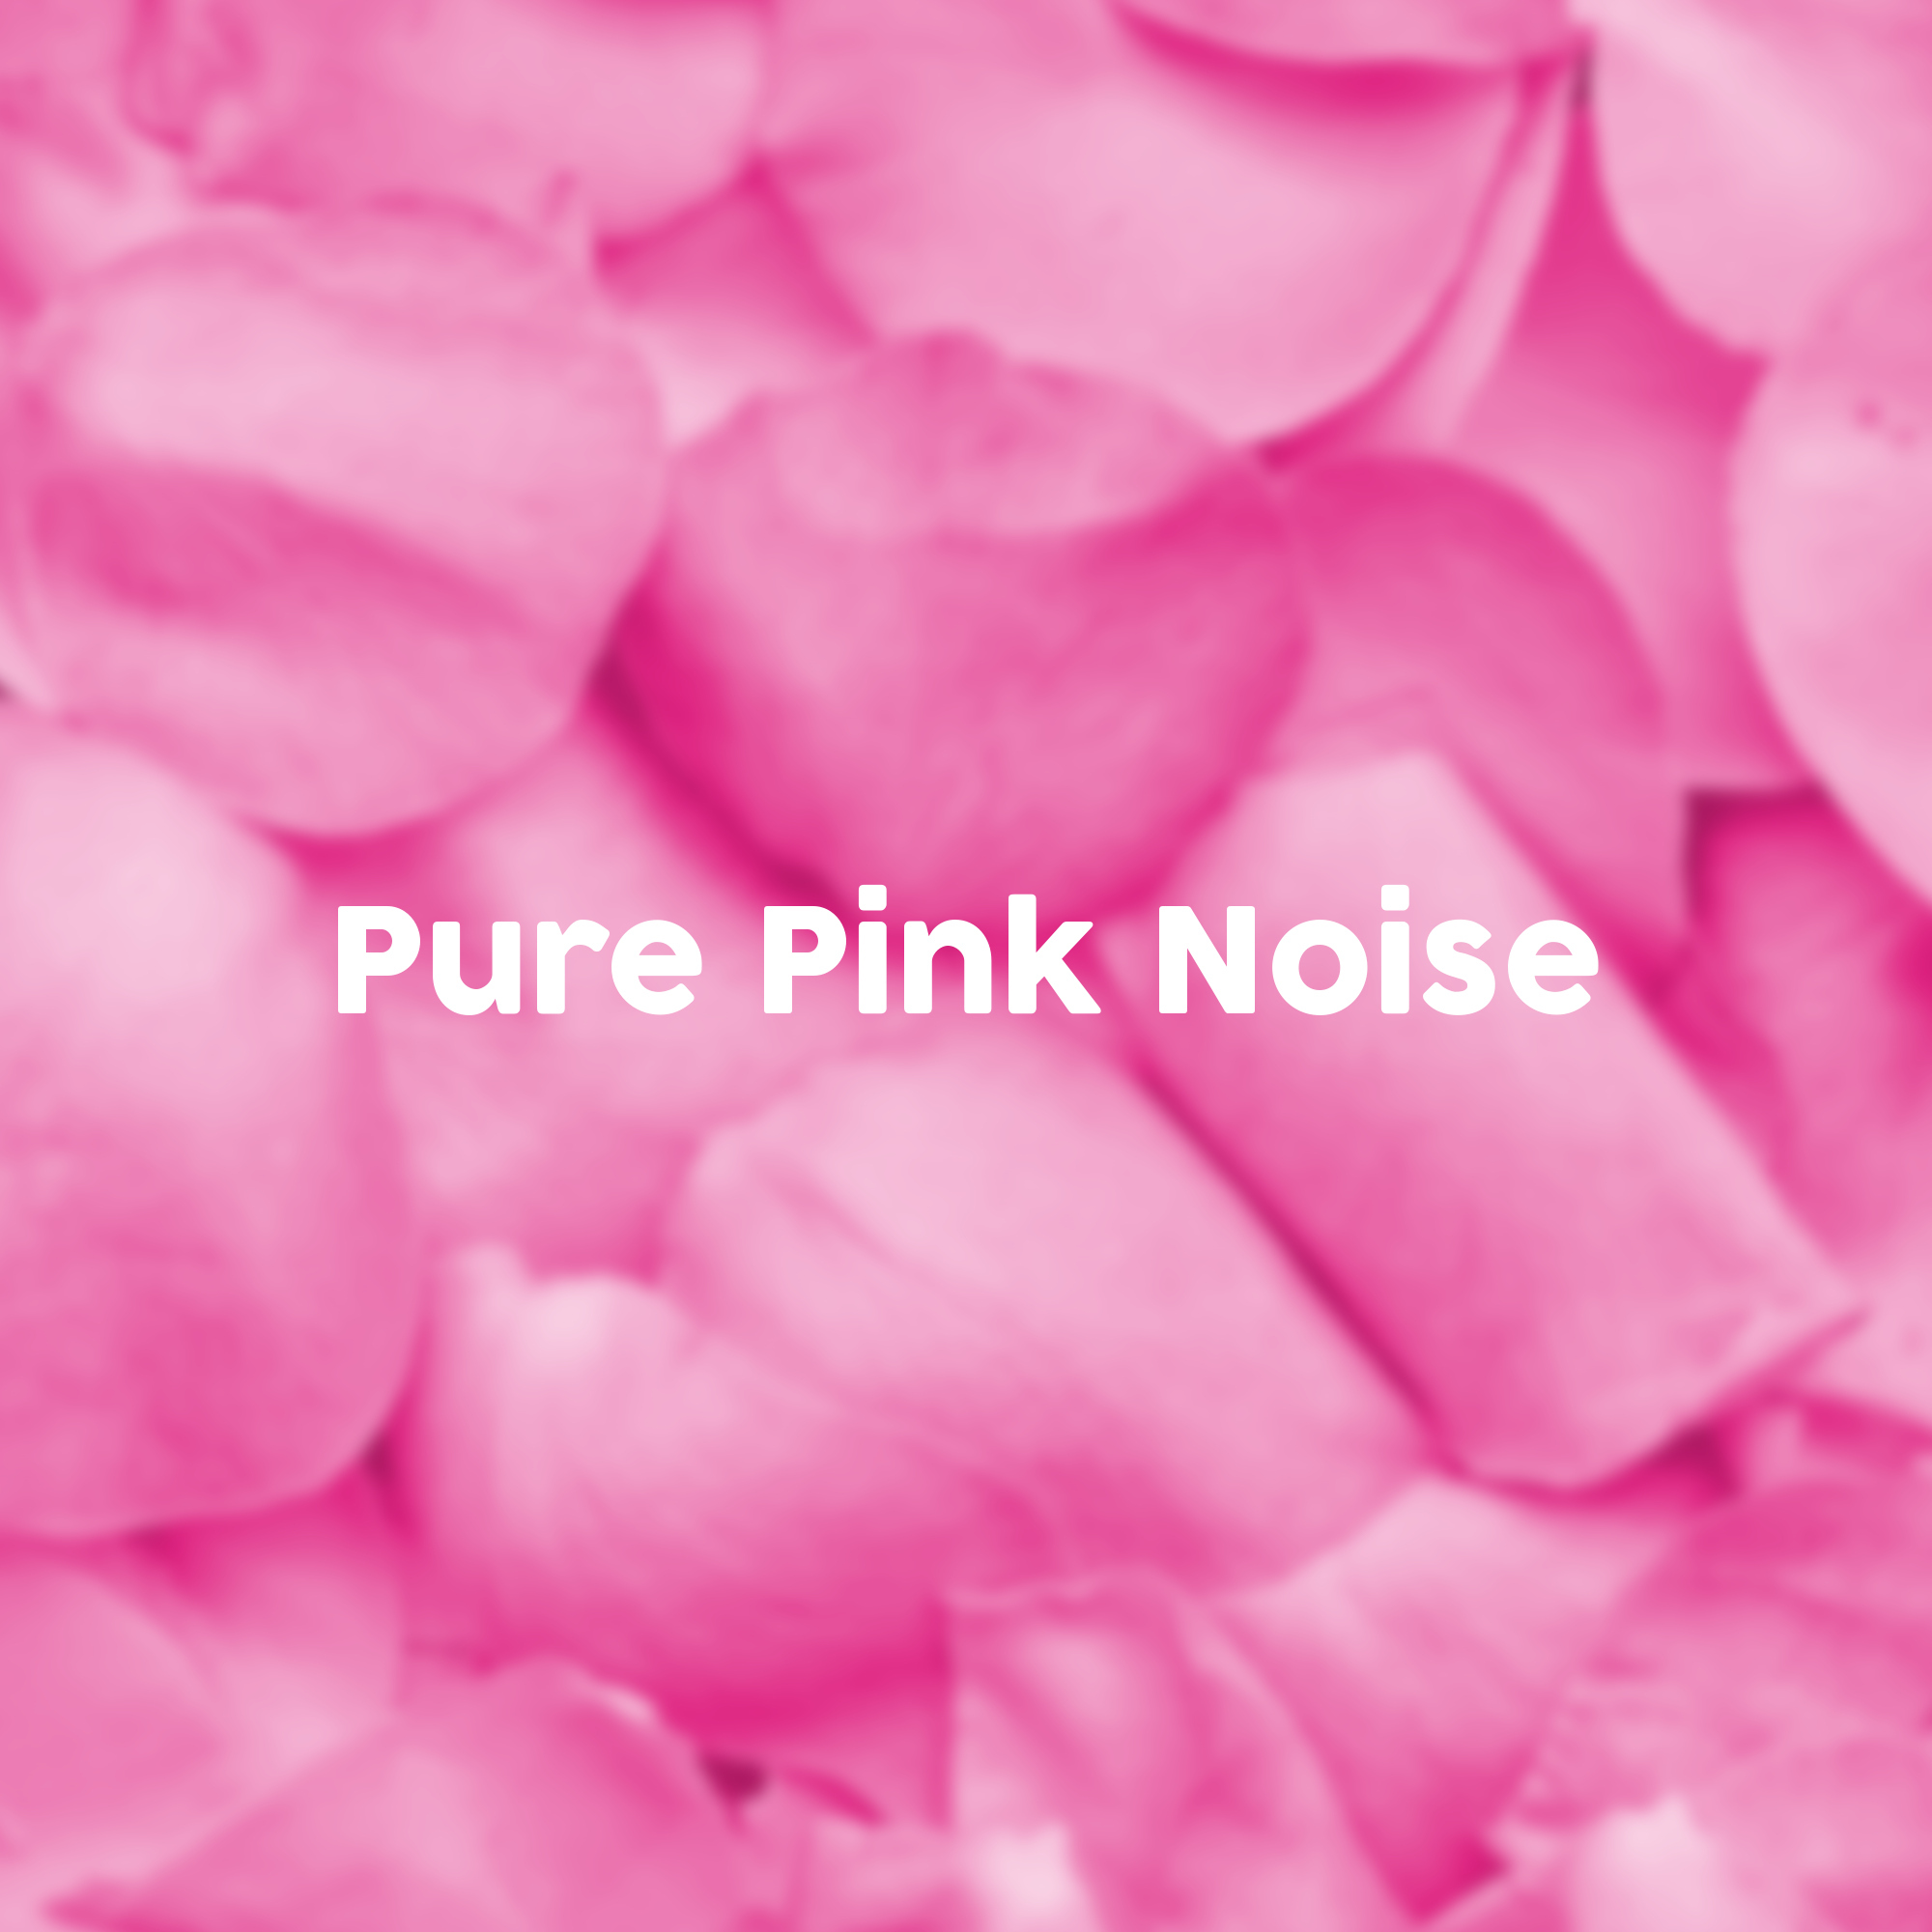 Pure Pink Noise - Loopable